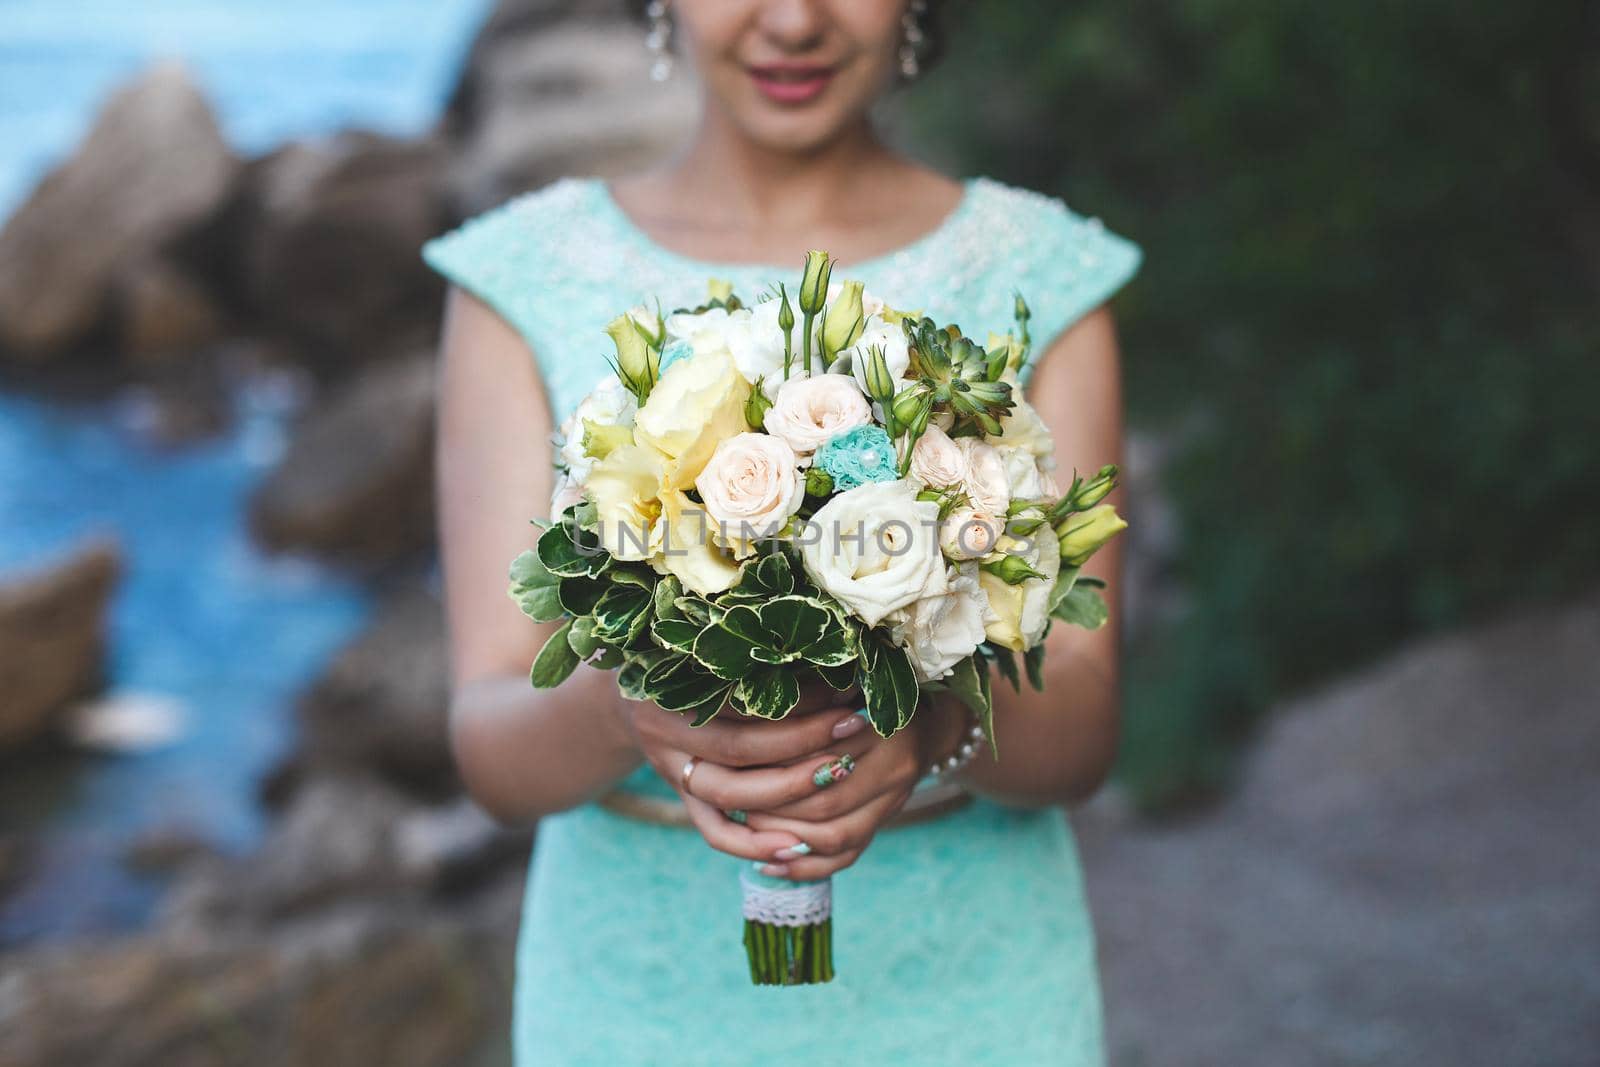 Bride in nature in the mountains near the water. Dress color Tiffany. Bride posing with bouquet by StudioPeace